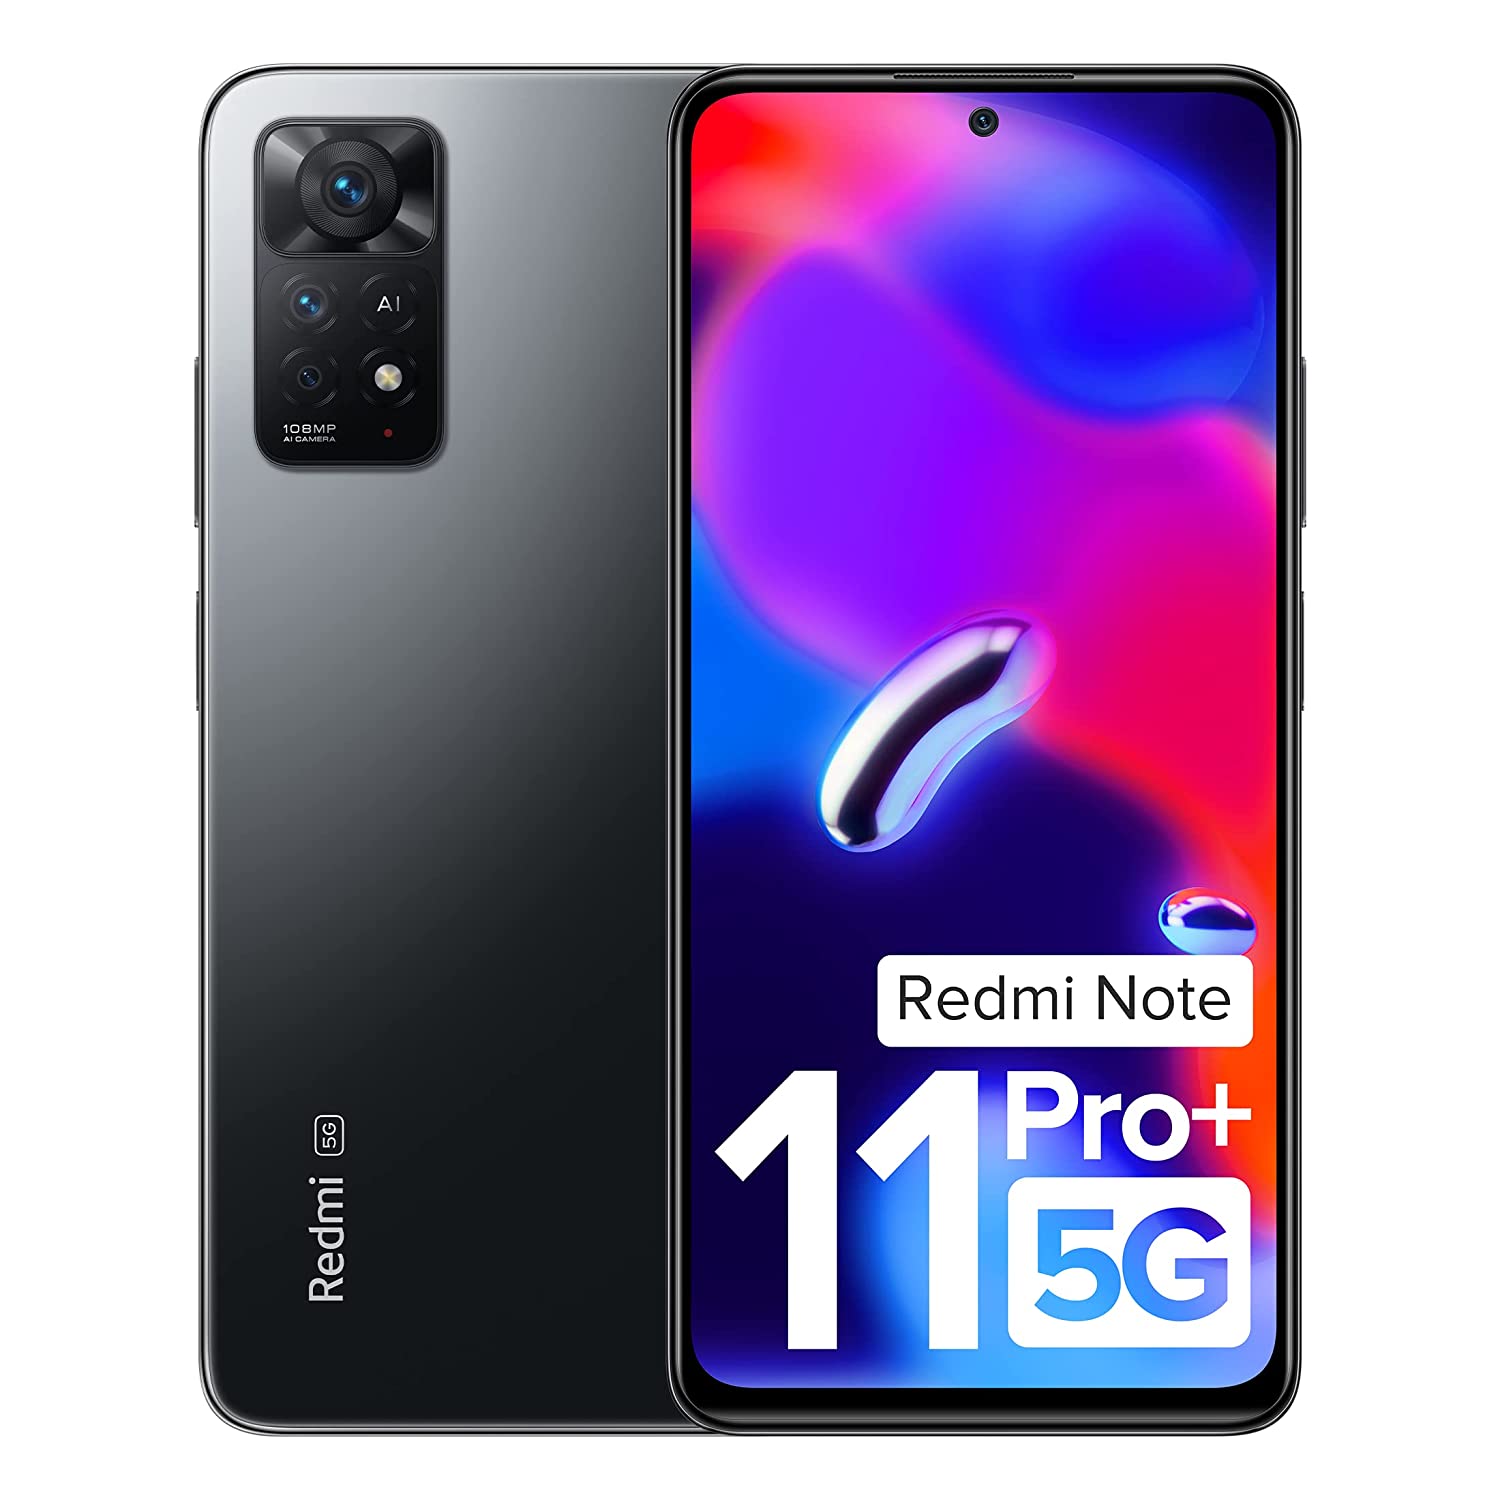 (Renewed) Redmi Note 11 Pro + 5G (Stealth Black, 8GB RAM, 128GB Storage) | 67W Turbo Charge | 120Hz Super AMOLED Display | Additional Exchange Offers | Charger Included| Get 2 Months of YouTube Premium Free!